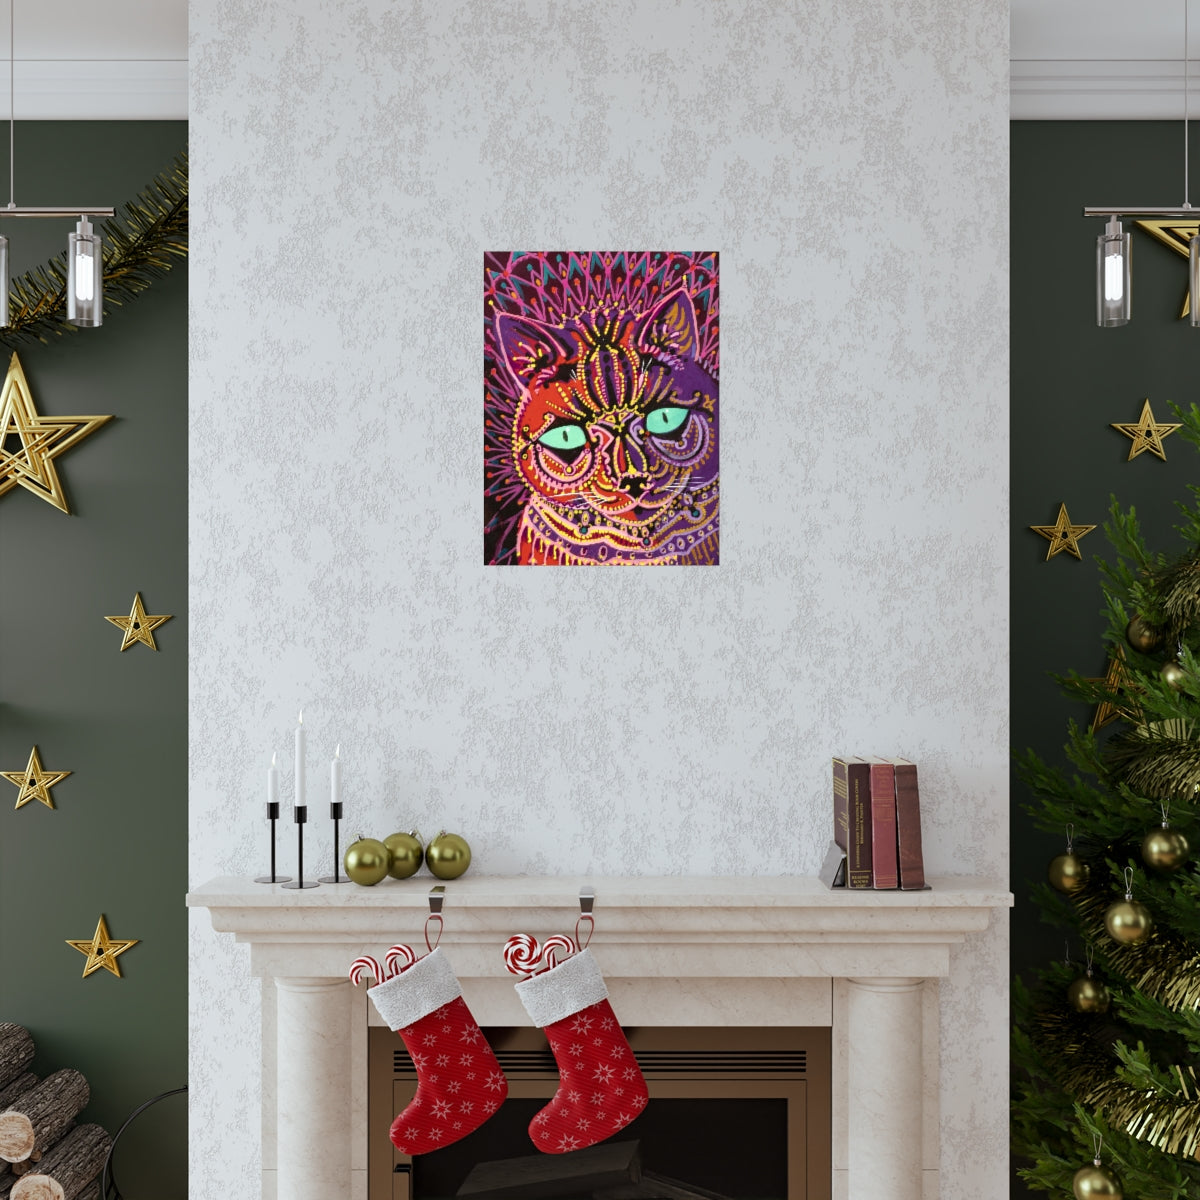 Cats Decorating Christmas Tree by Louis Wain